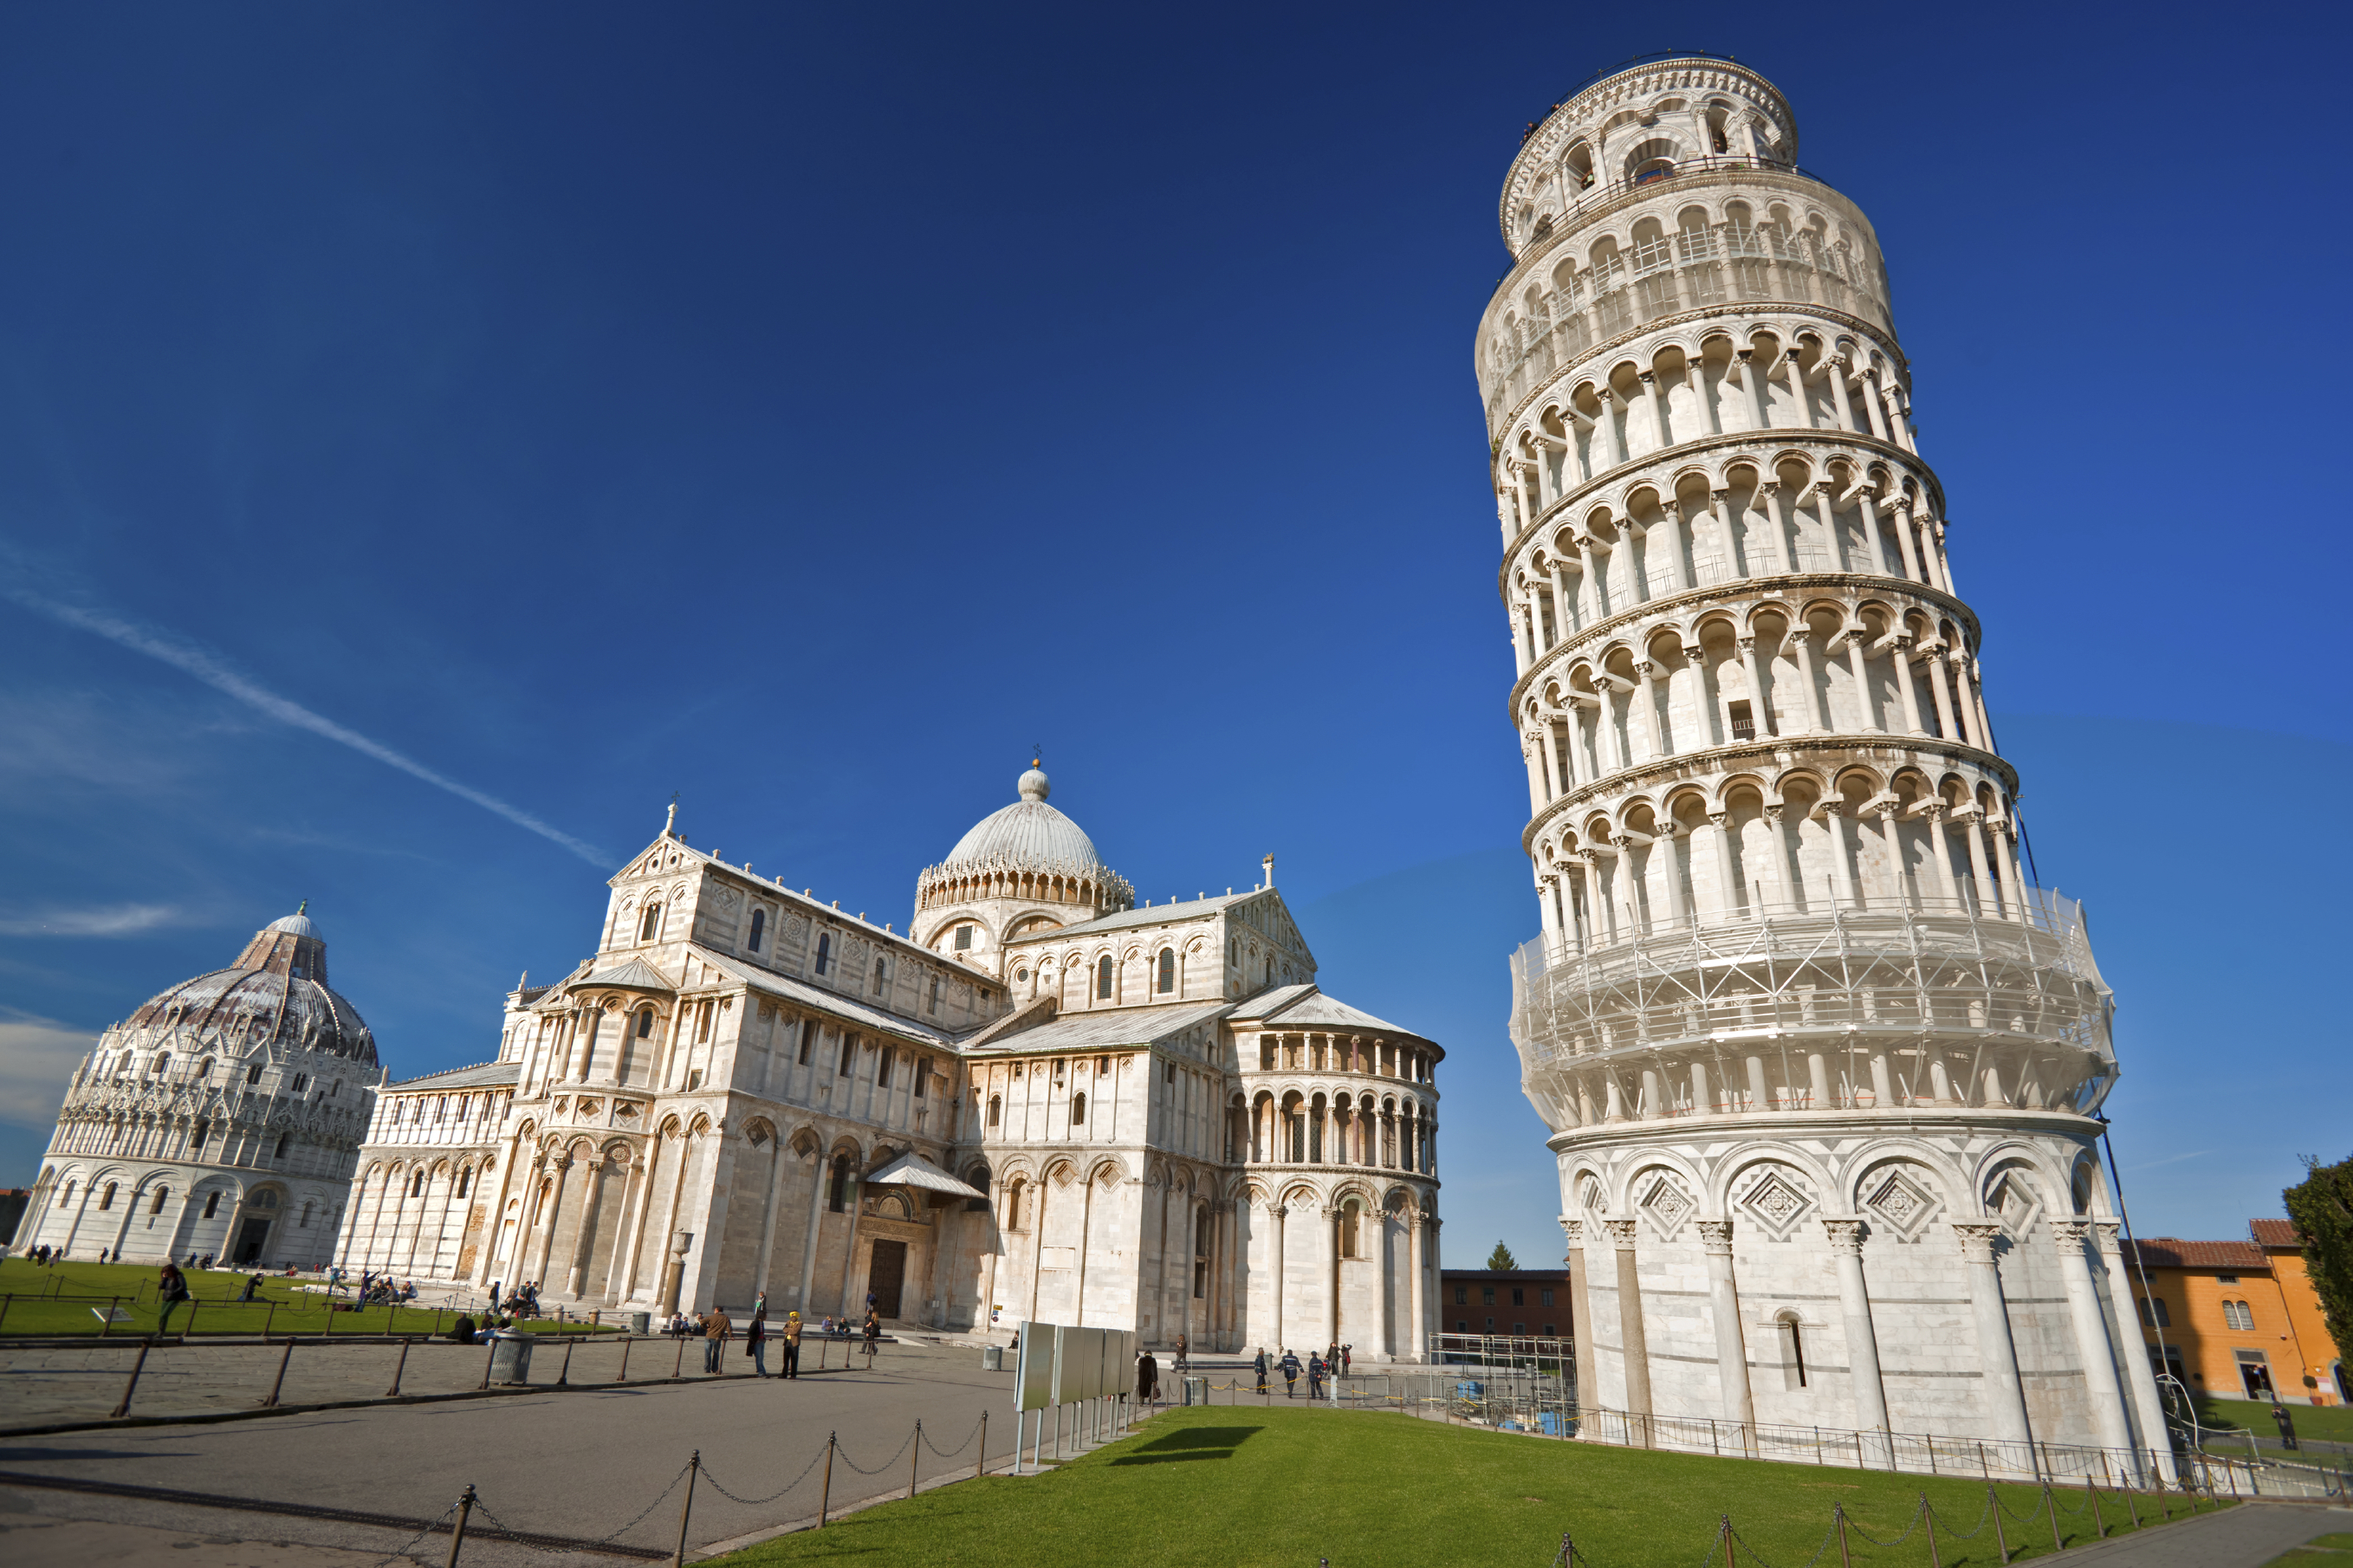 One of Italy's most famous landmarks - The Leaning tower of Pisa